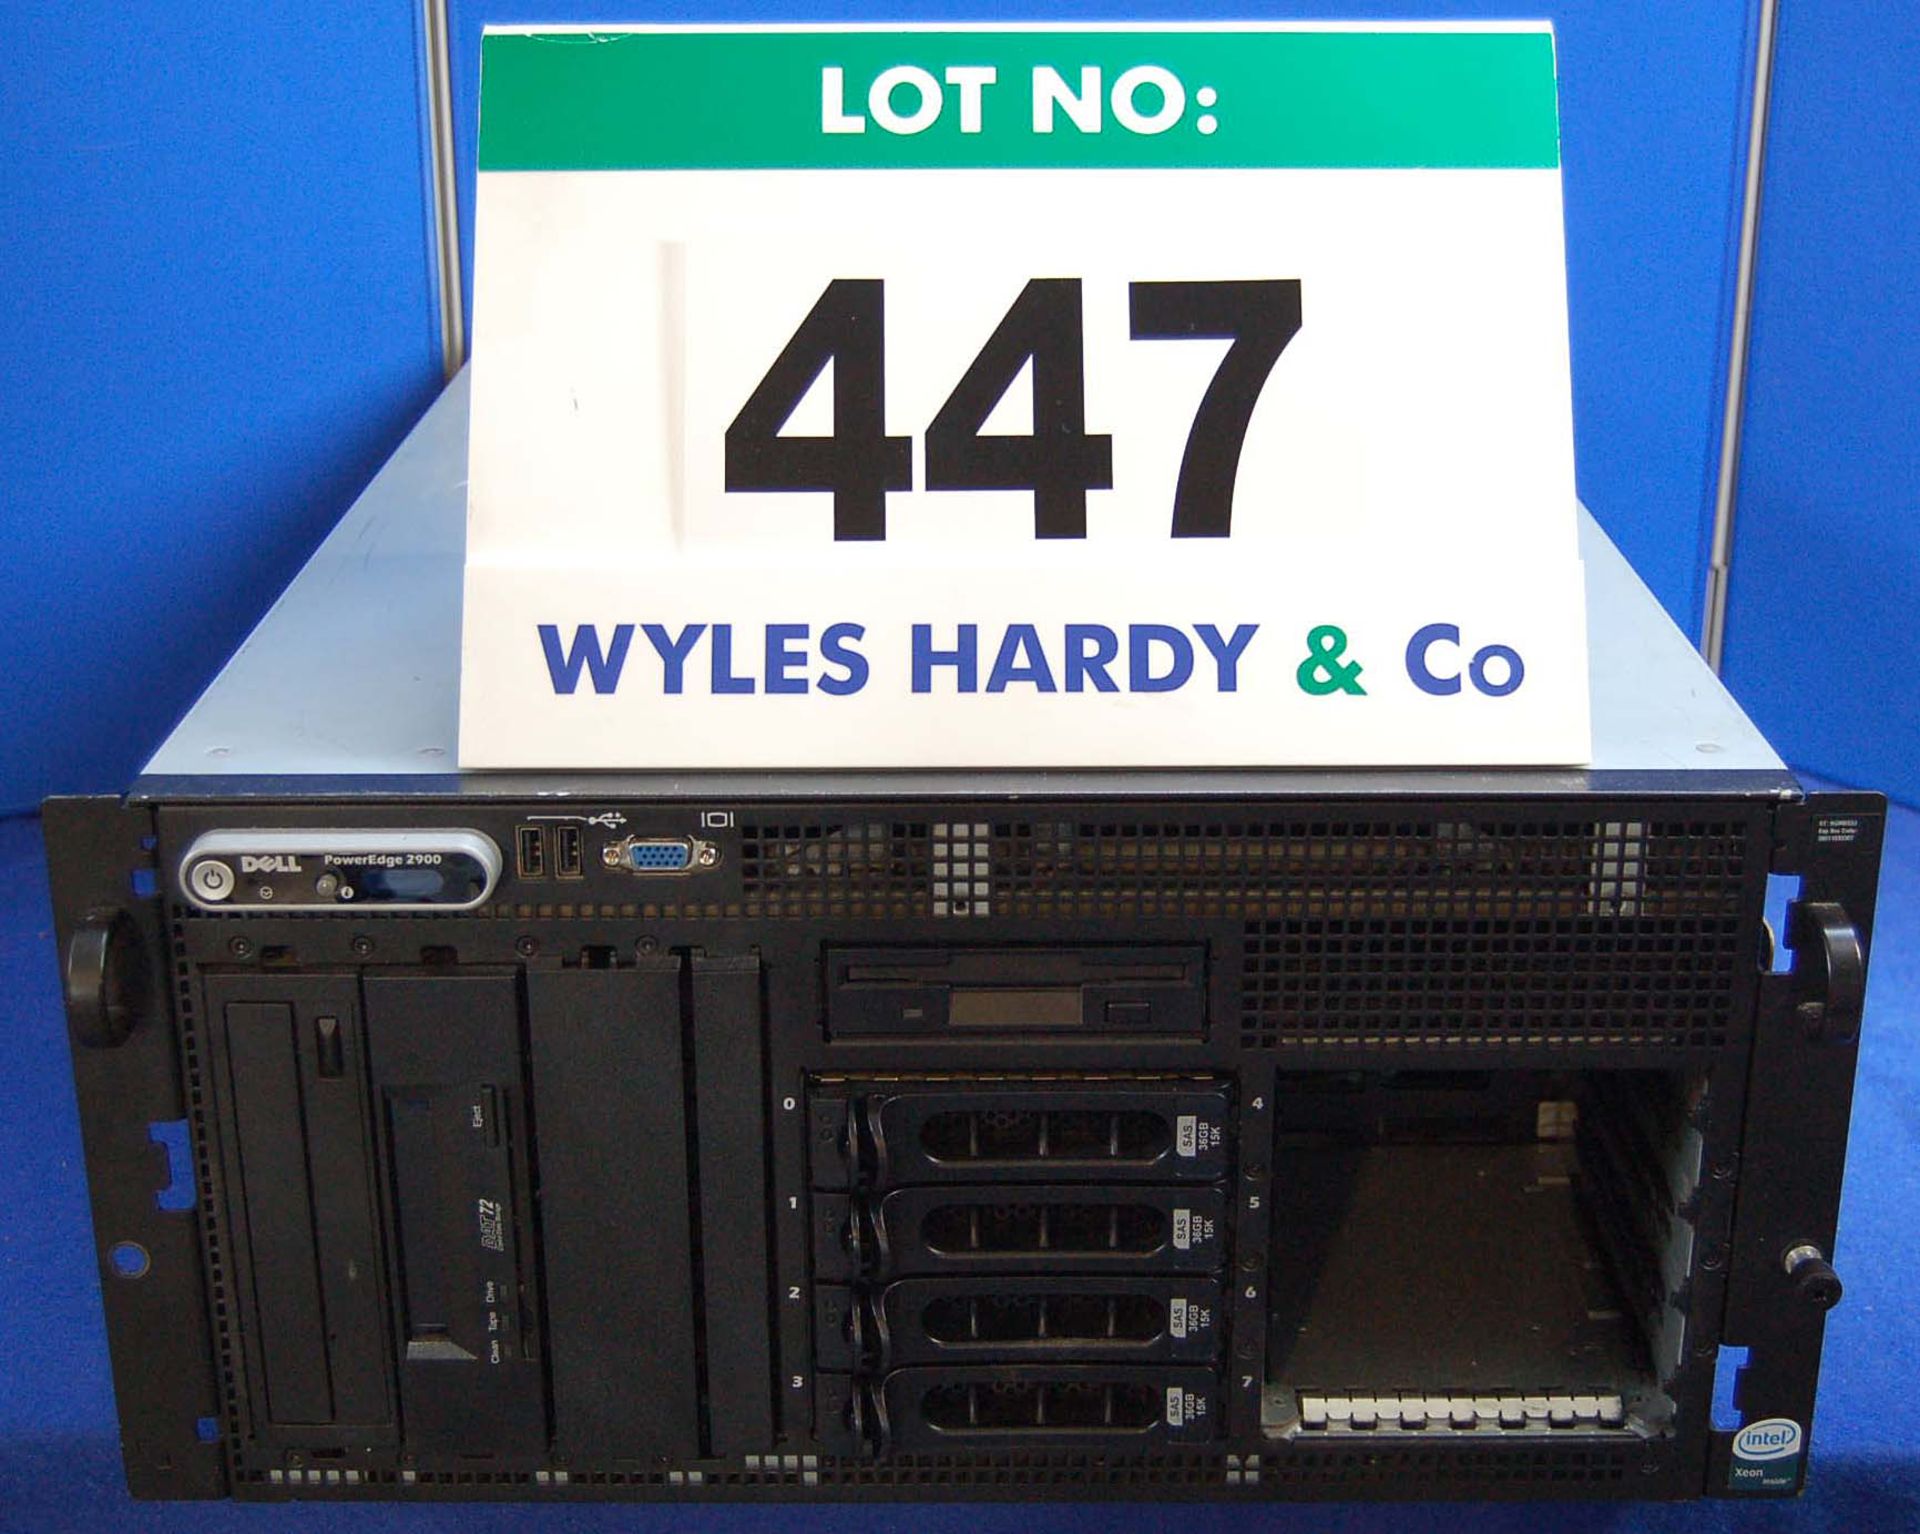 A DELL PowerEdge 2900 4U Rack Server with Twin INTEL Dual Core 3.2Ghz Processors, 12.0GB Memory 3.